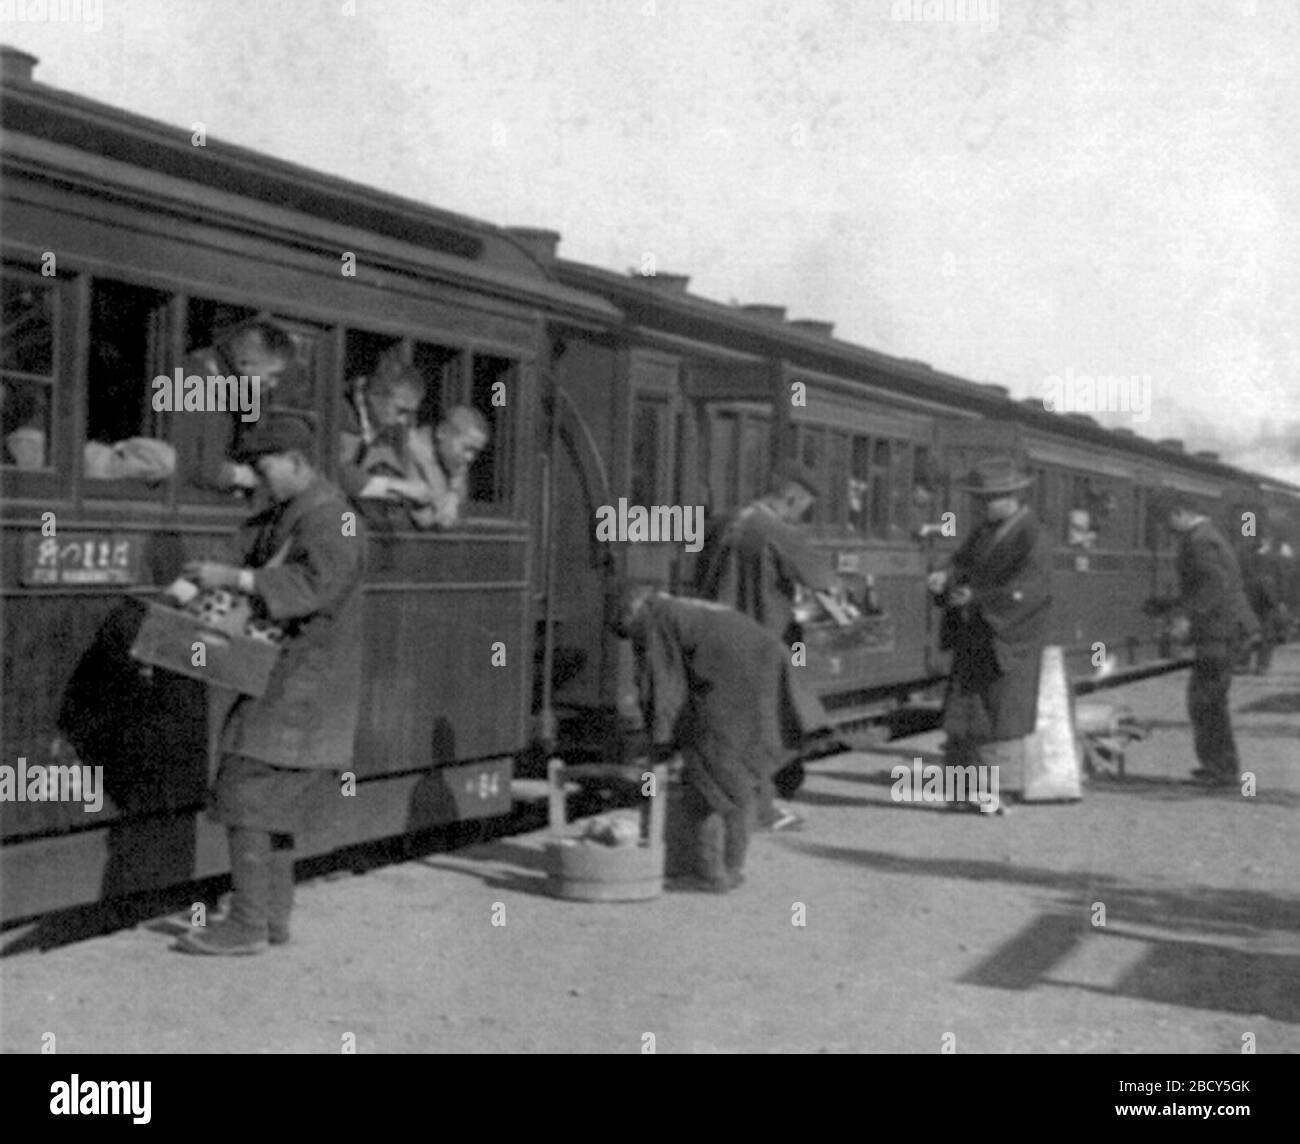 'Ten minutes for refreshments, Japan / Passengers of train leaning out windows, being served refreshments by men on railroad platform.  日本語: 10分間の休憩、客車の窓を開けて駅弁を買う; circa 1902 date QS:P,+1902-00-00T00:00:00Z/9,P1480,Q5727902; This image  is available from the United States Library of Congress's Prints and Photographs division under the digital ID cph.3b42202.This tag does not indicate the copyright status of the attached work. A normal copyright tag is still required. See Commons:Licensing for more information.   العربية | беларуская (тарашкевіца) | čeština | Deutsch | English | español | فارس Stock Photo